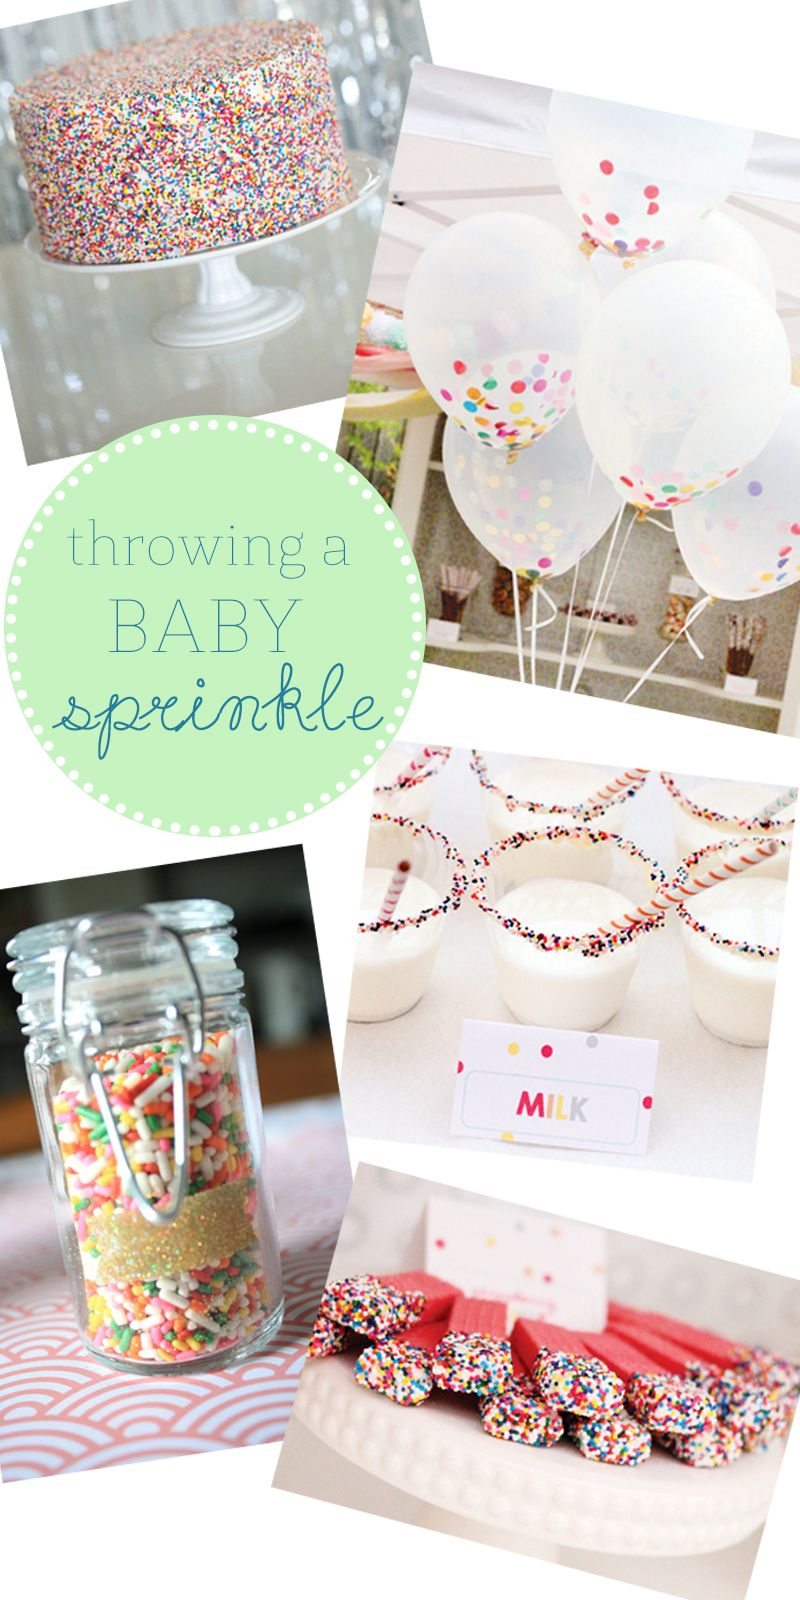 10 Pretty Baby Shower Ideas For Second Baby fun ideas for your baby sprinkle party in 2019 baby shower ideas 2024